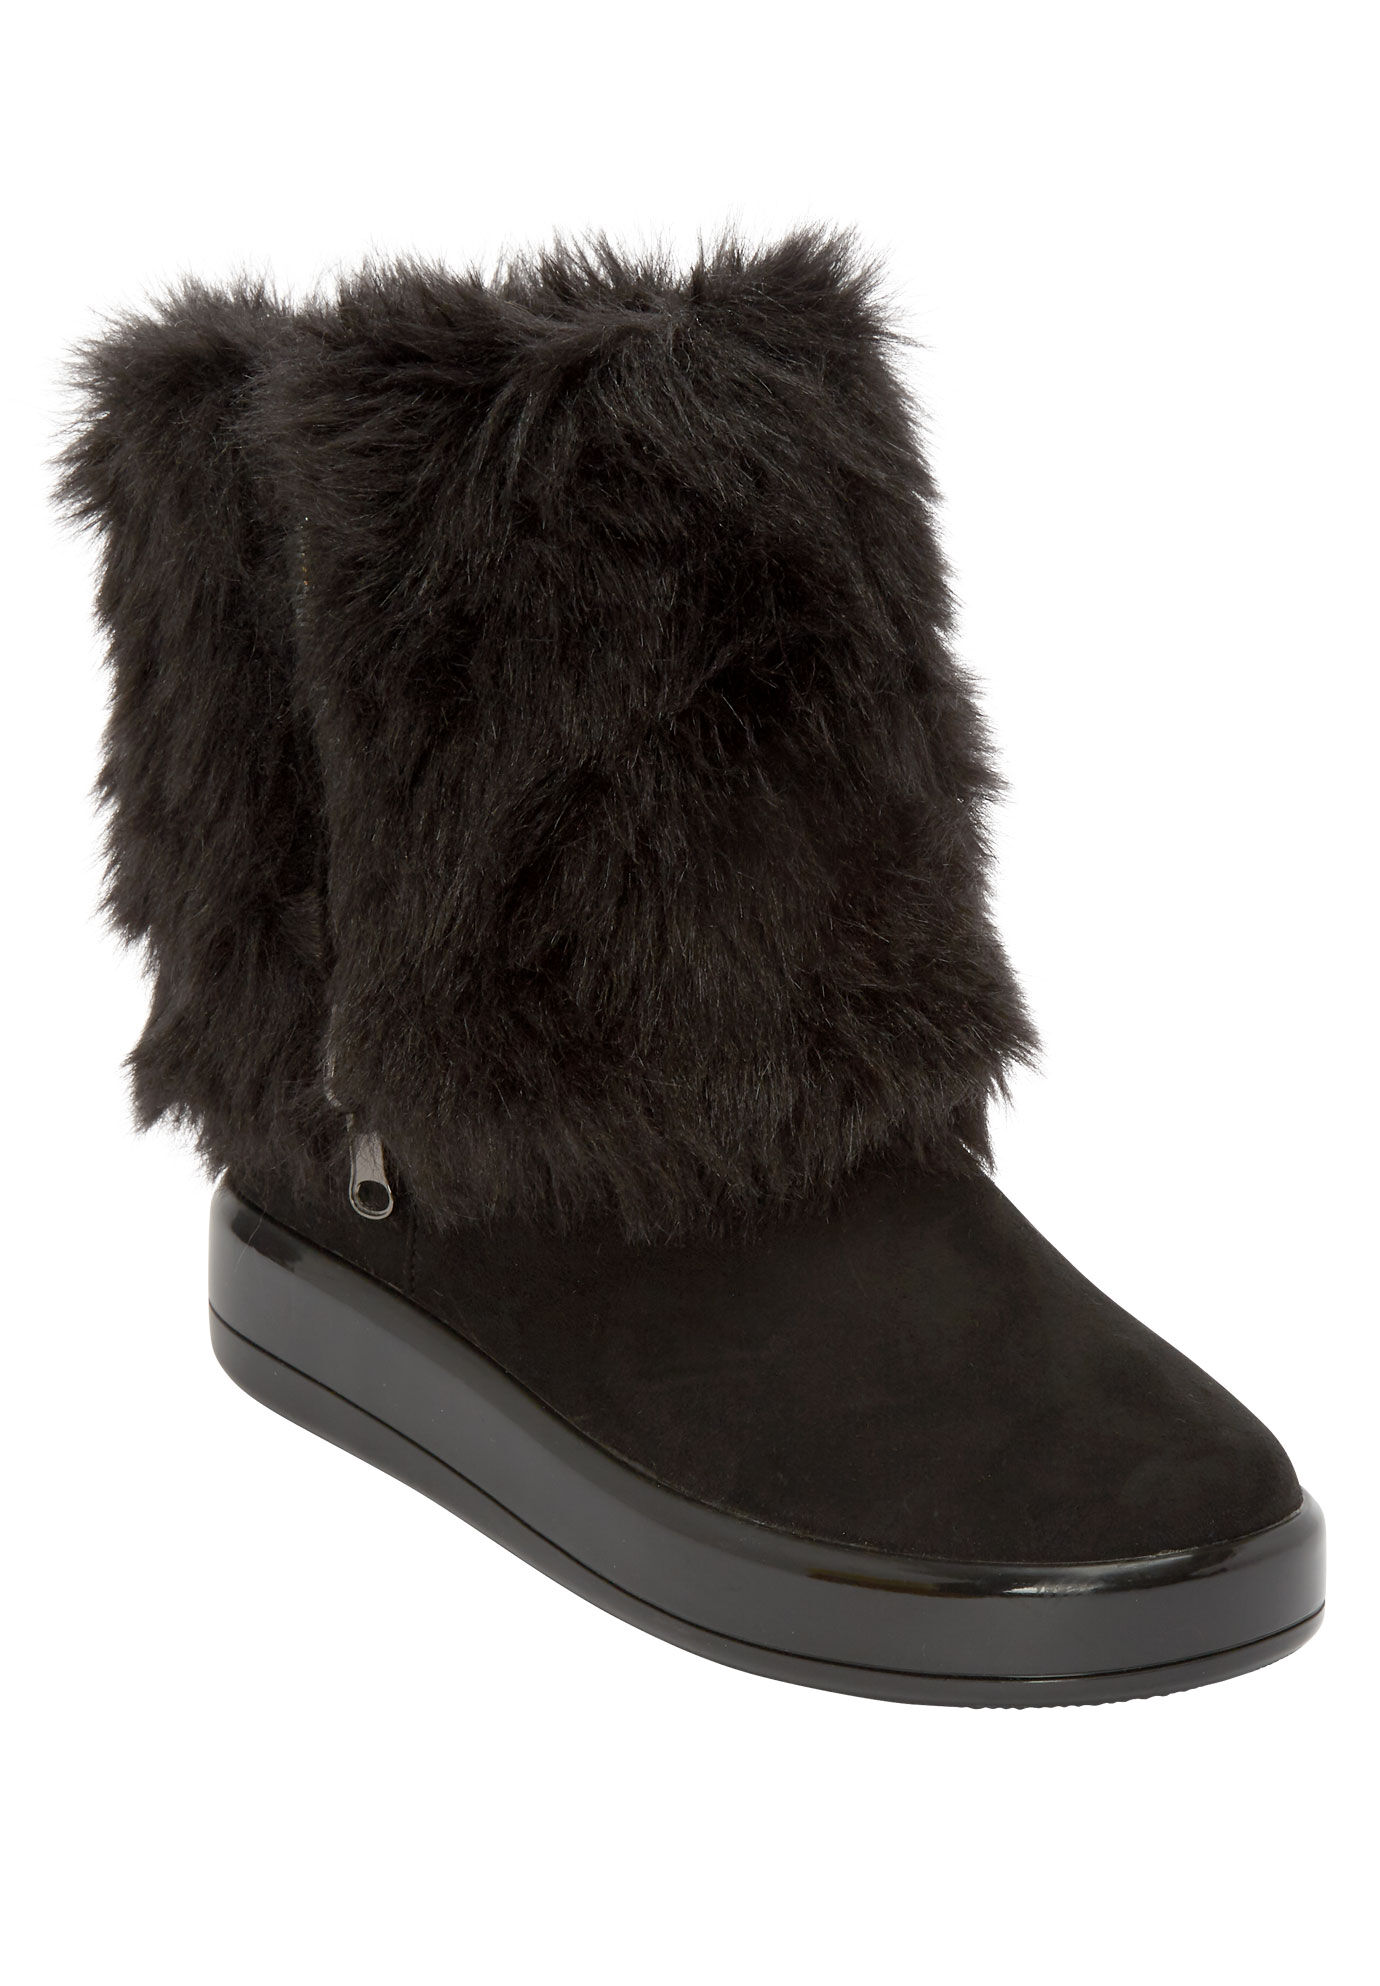 womens wide width fur lined boots